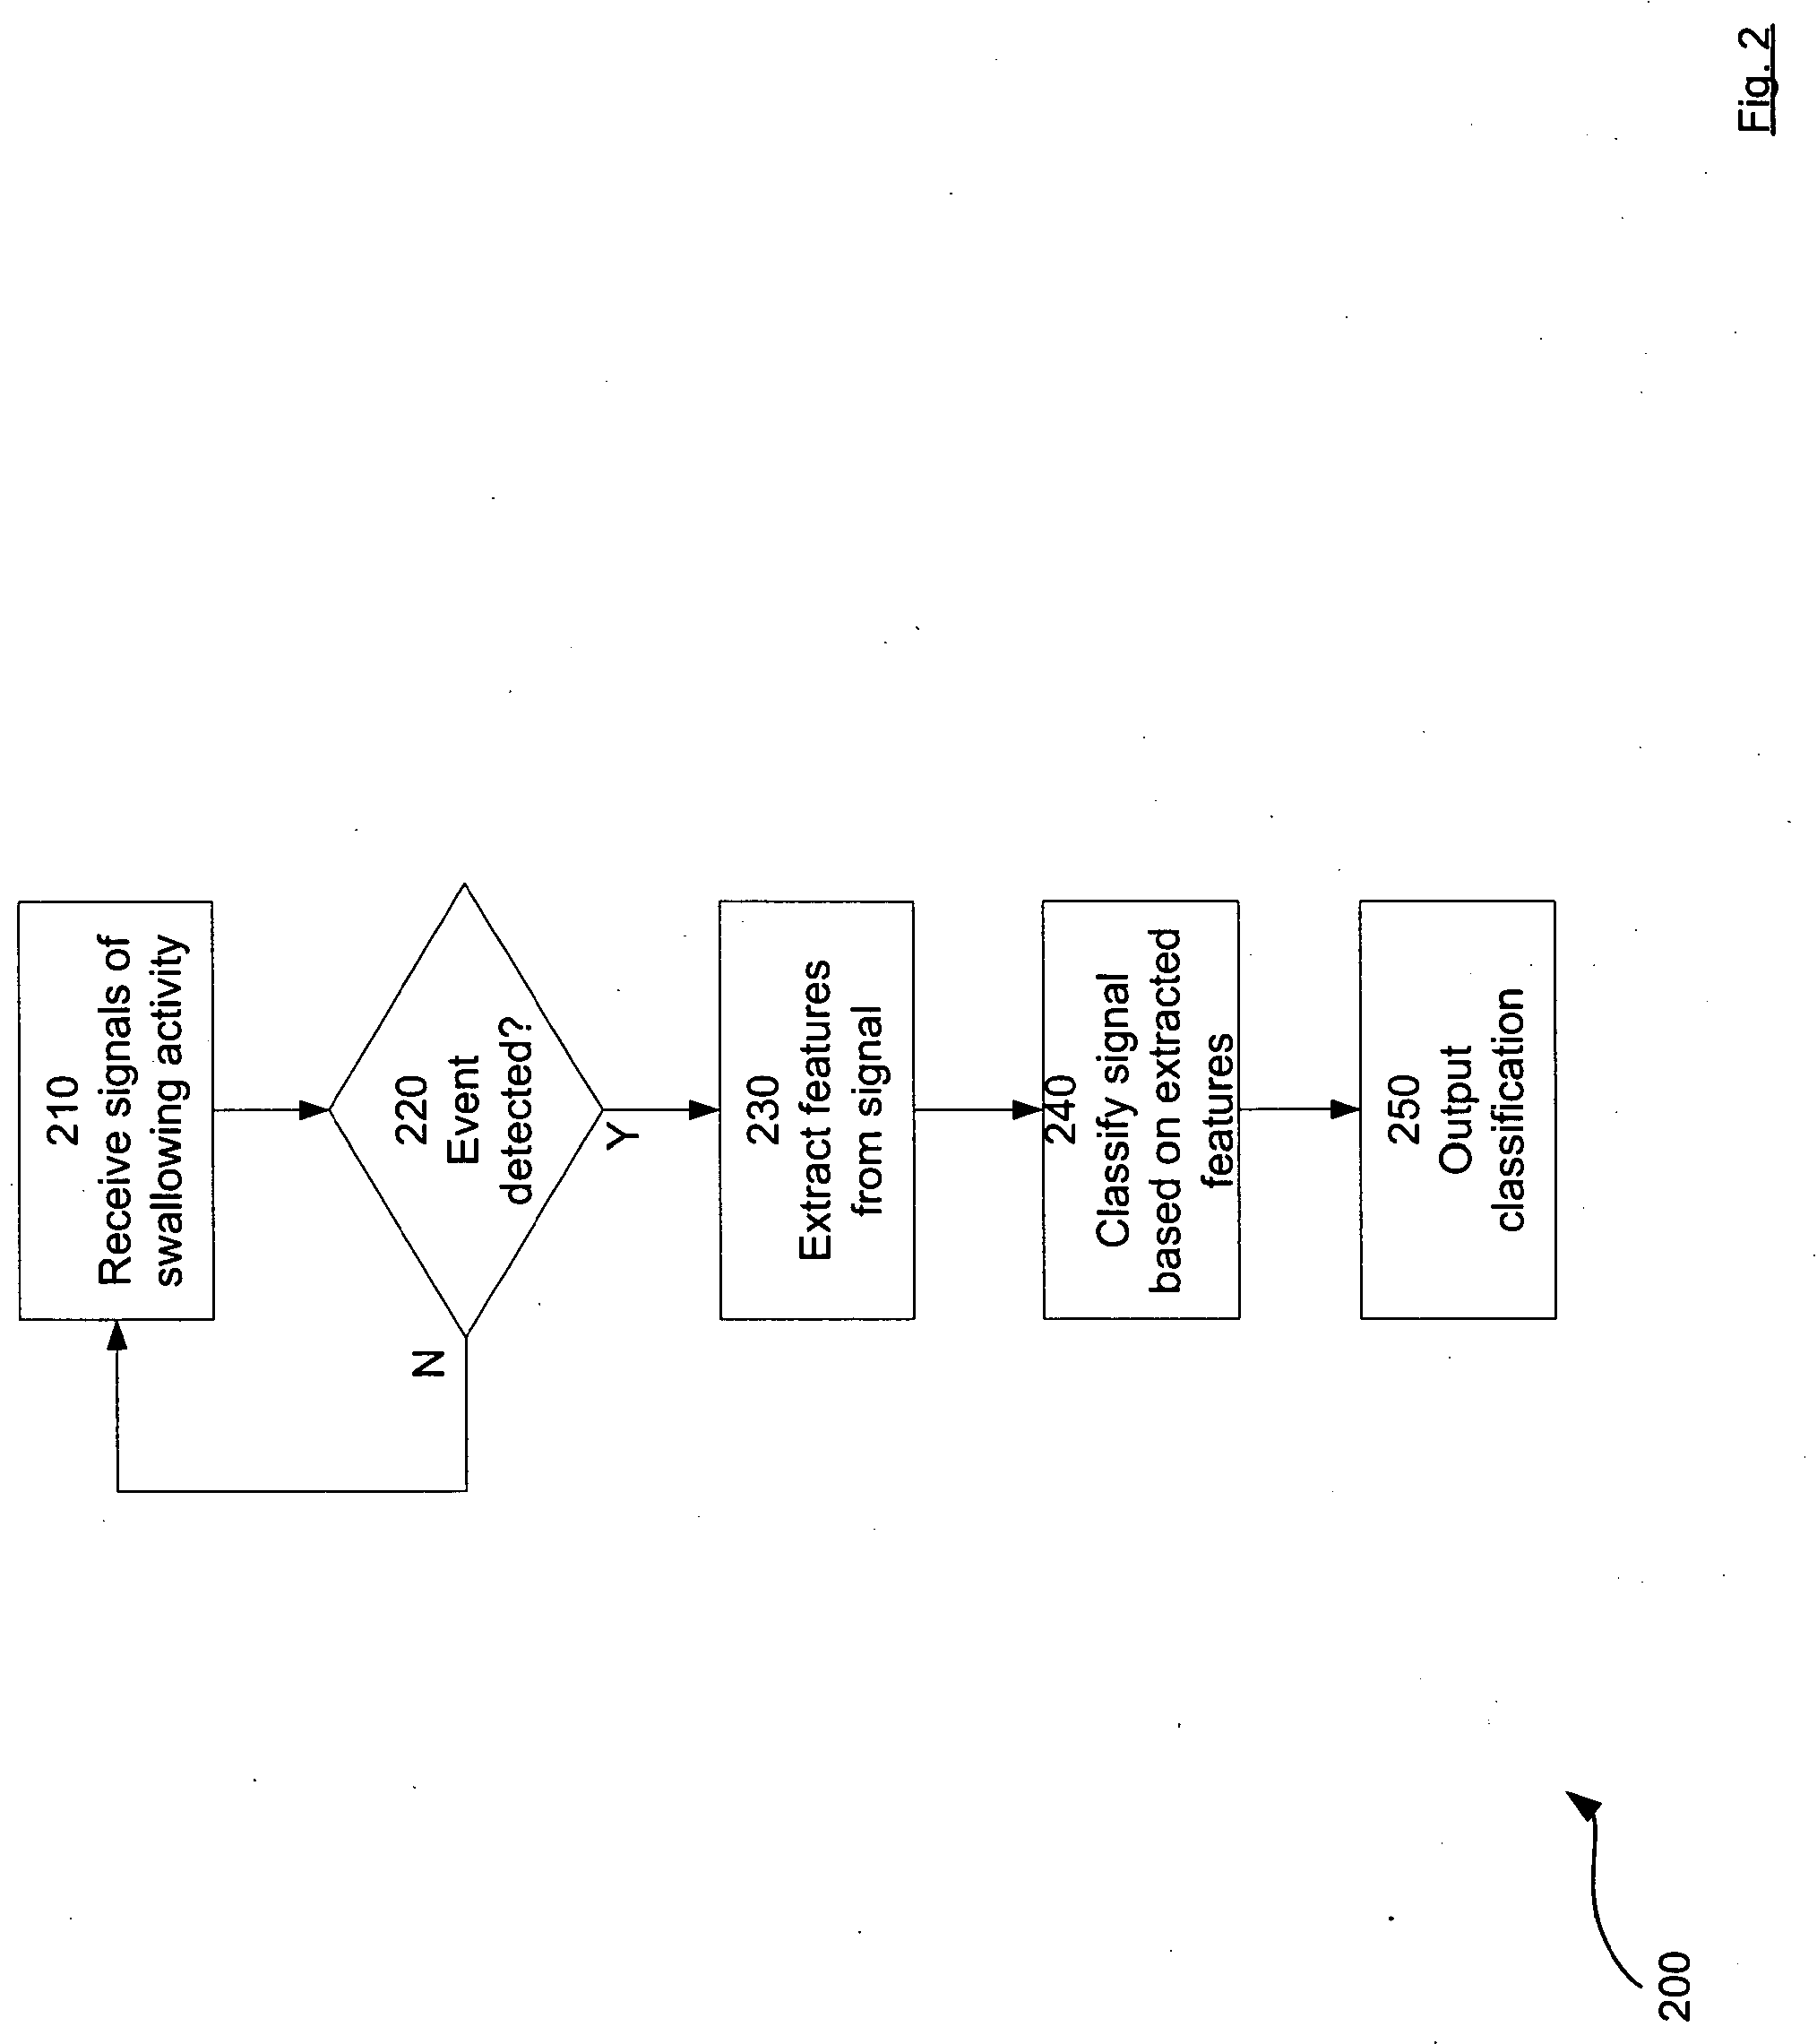 Apparatus and Method for Detecting Aspiration